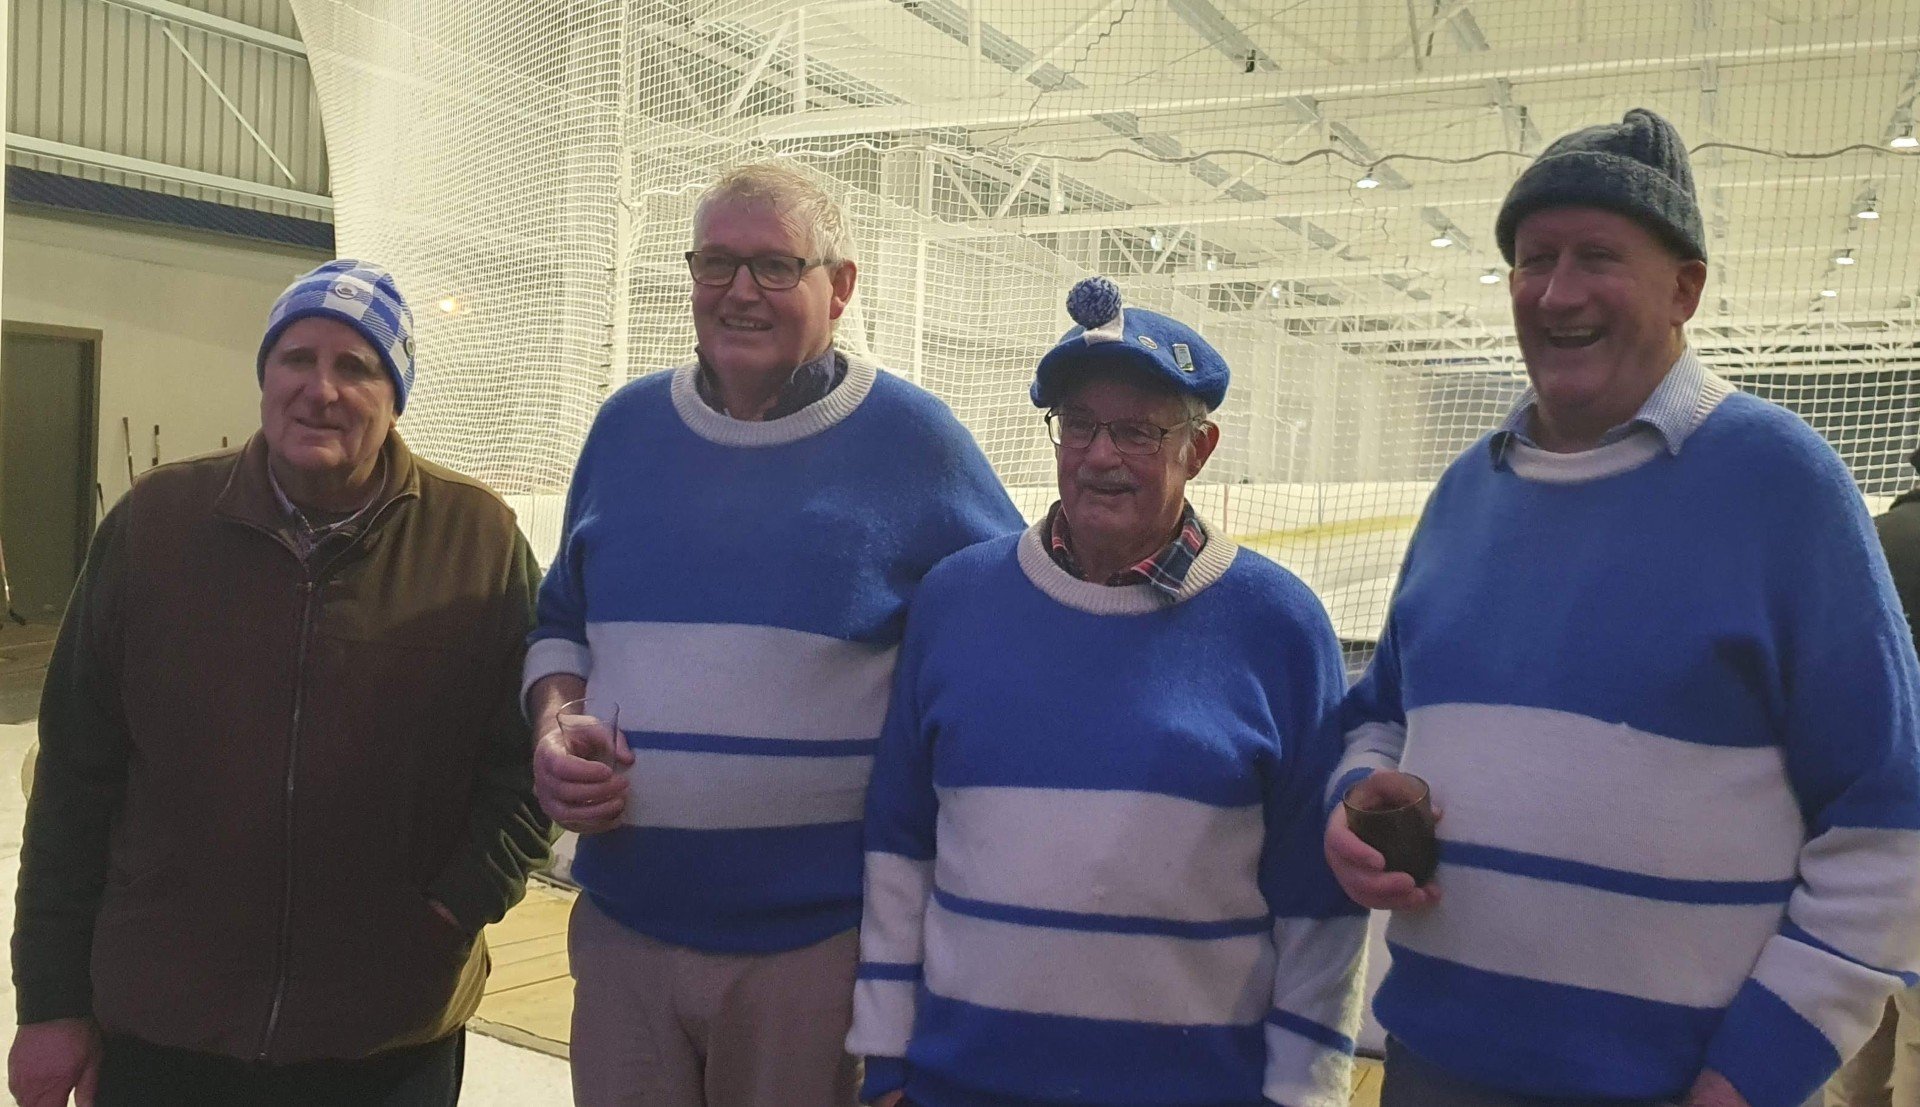 Celebrating after winning the Macrae Trophy earlier this month are Gore No 1 curling team members...